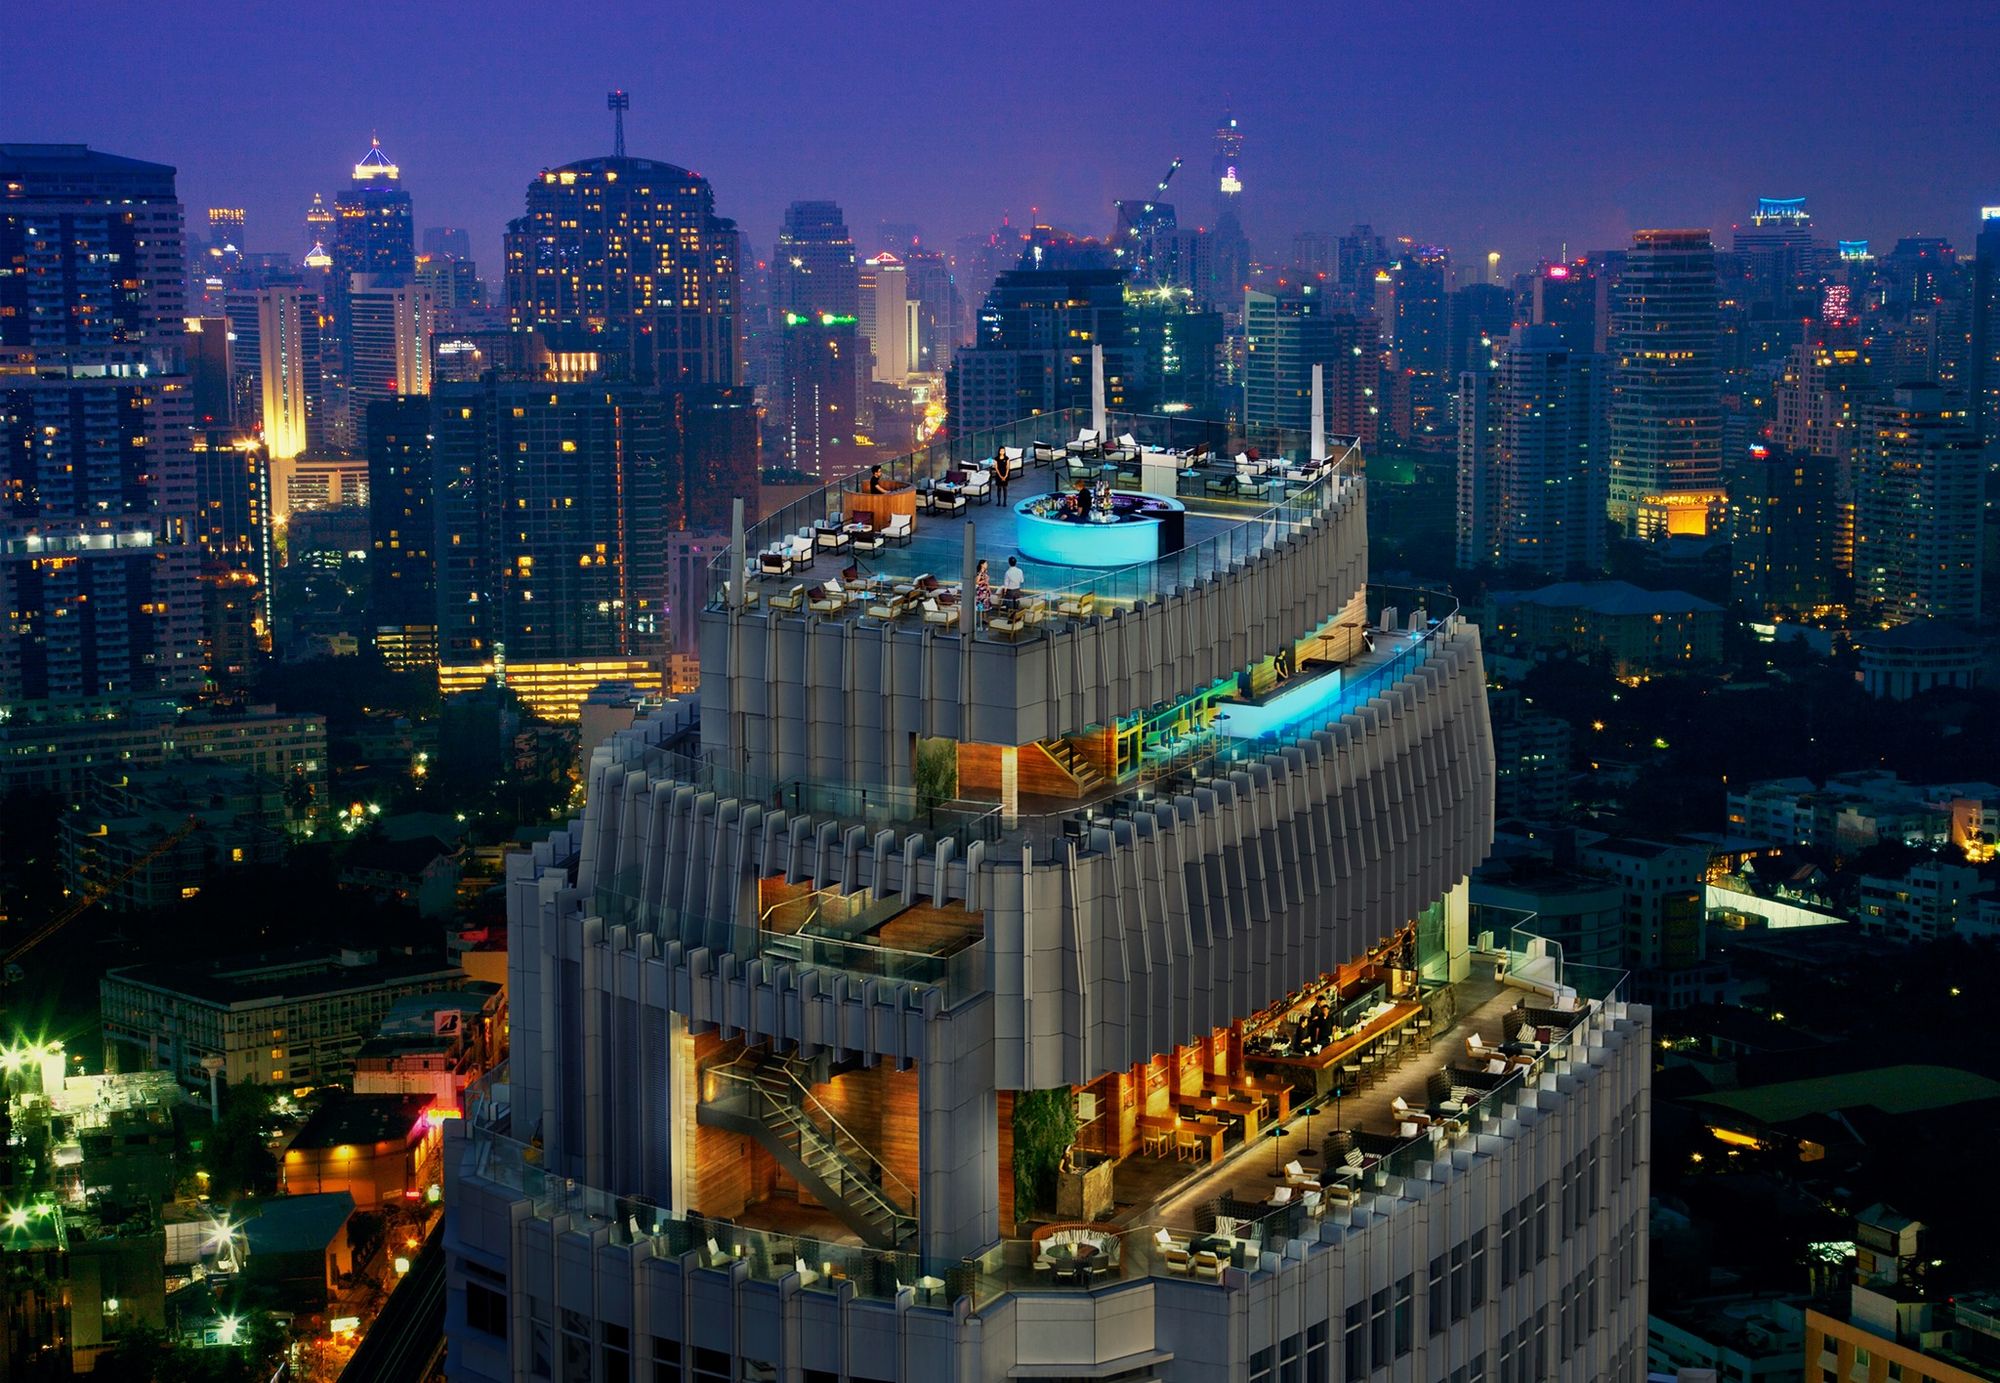 Octave Rooftop Lounge & Bar offers a diverse range of experiences.